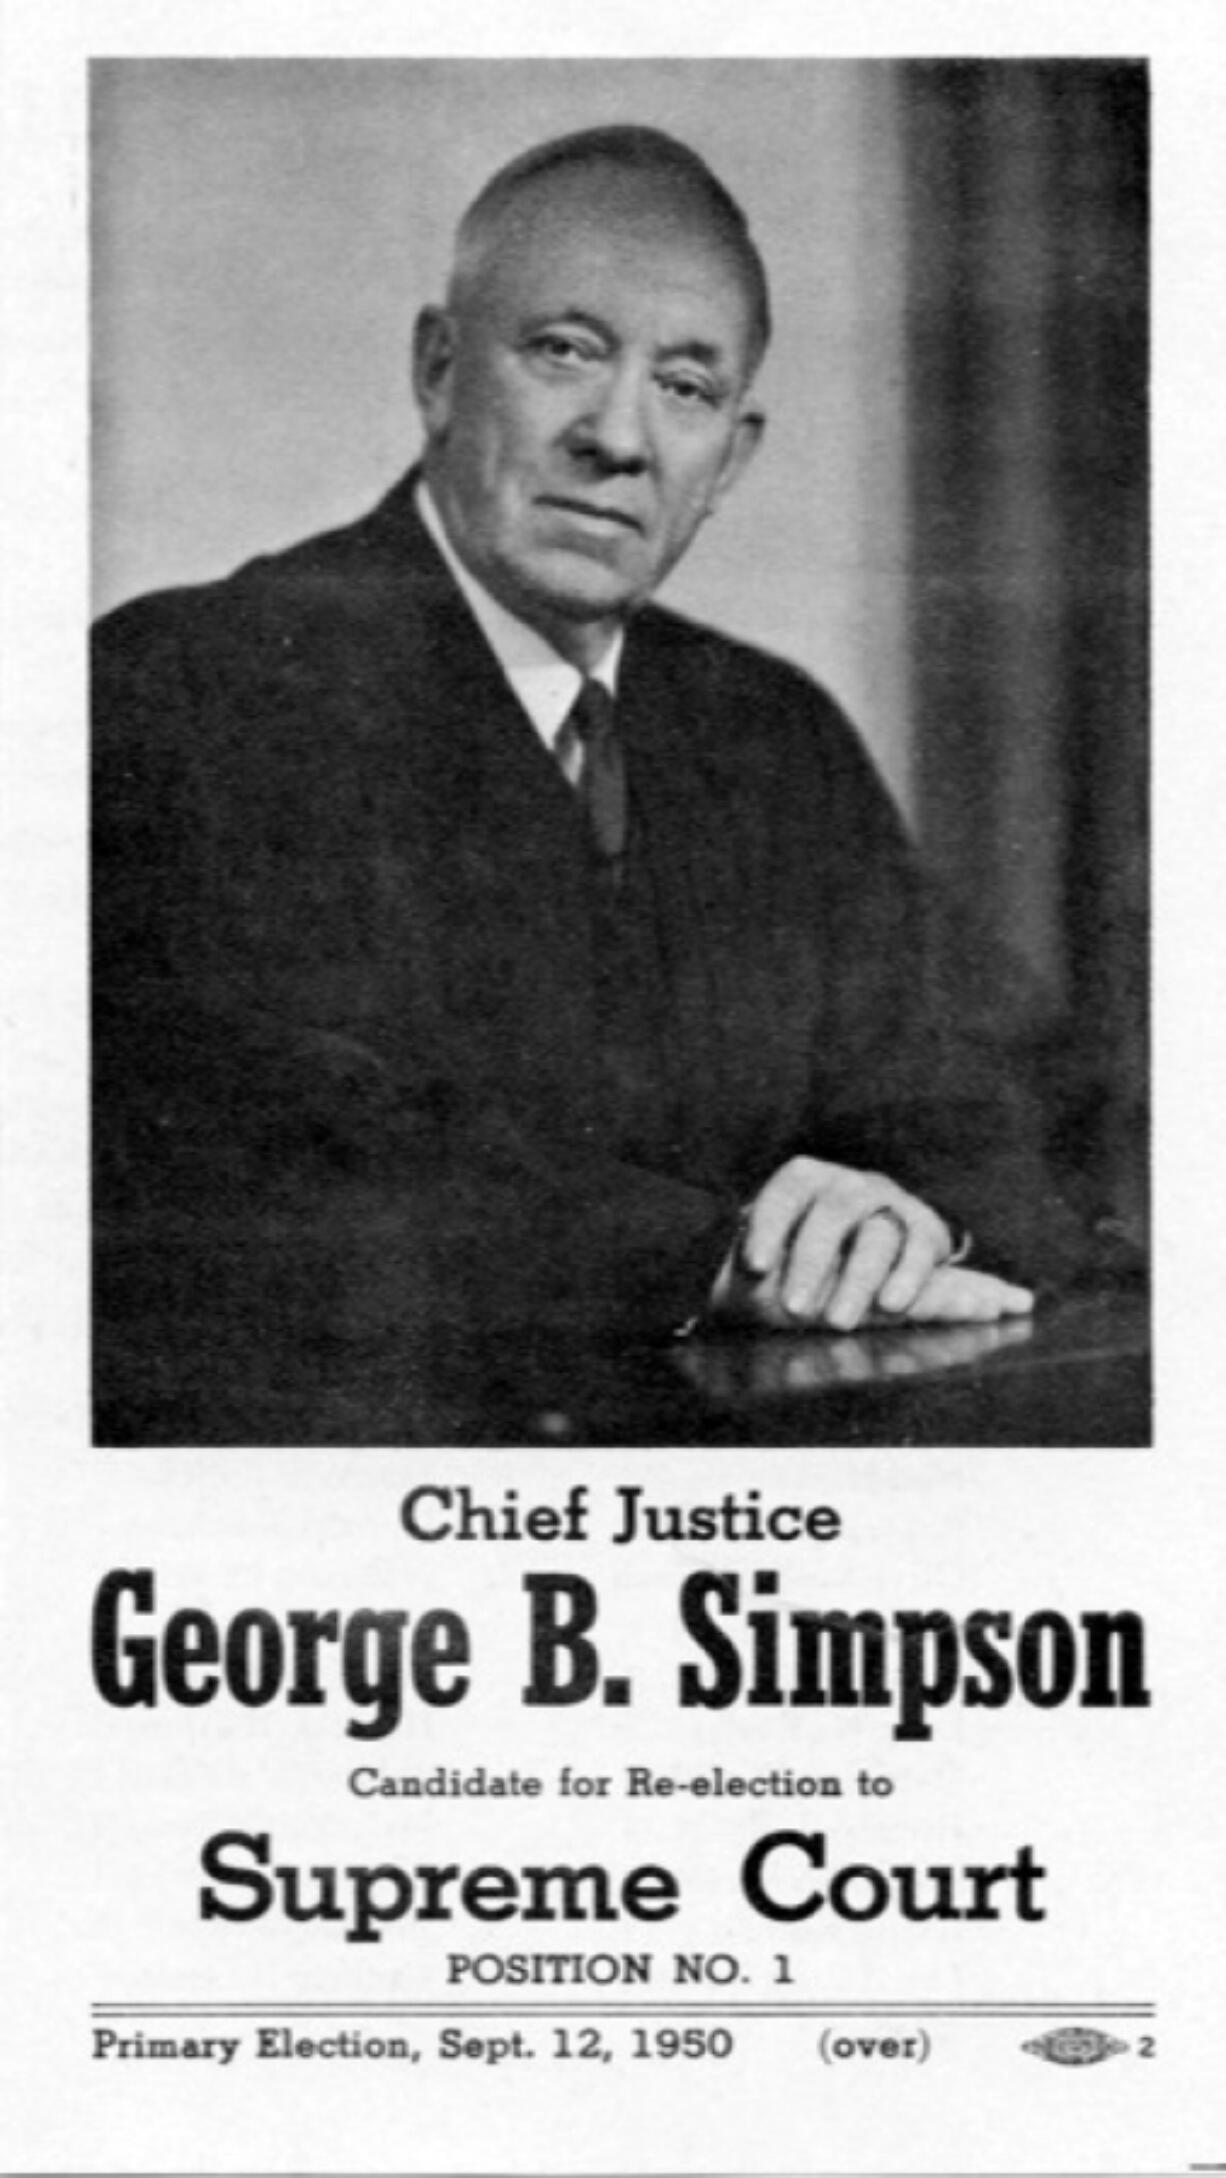 Attorneys W.E. Yates, father of Vancouver poet Elizabeth Crawford Yates, and Charles Lane defended George Edward Whitfield of first-degree murder before one of Clark County's most respected judges, George B. Simpson, pictured here. Starting in 1920, Simpson served 17 years as a judge. Then, in 1937, he joined the state Supreme Court. He sentenced Whitfield to hang for his crime.